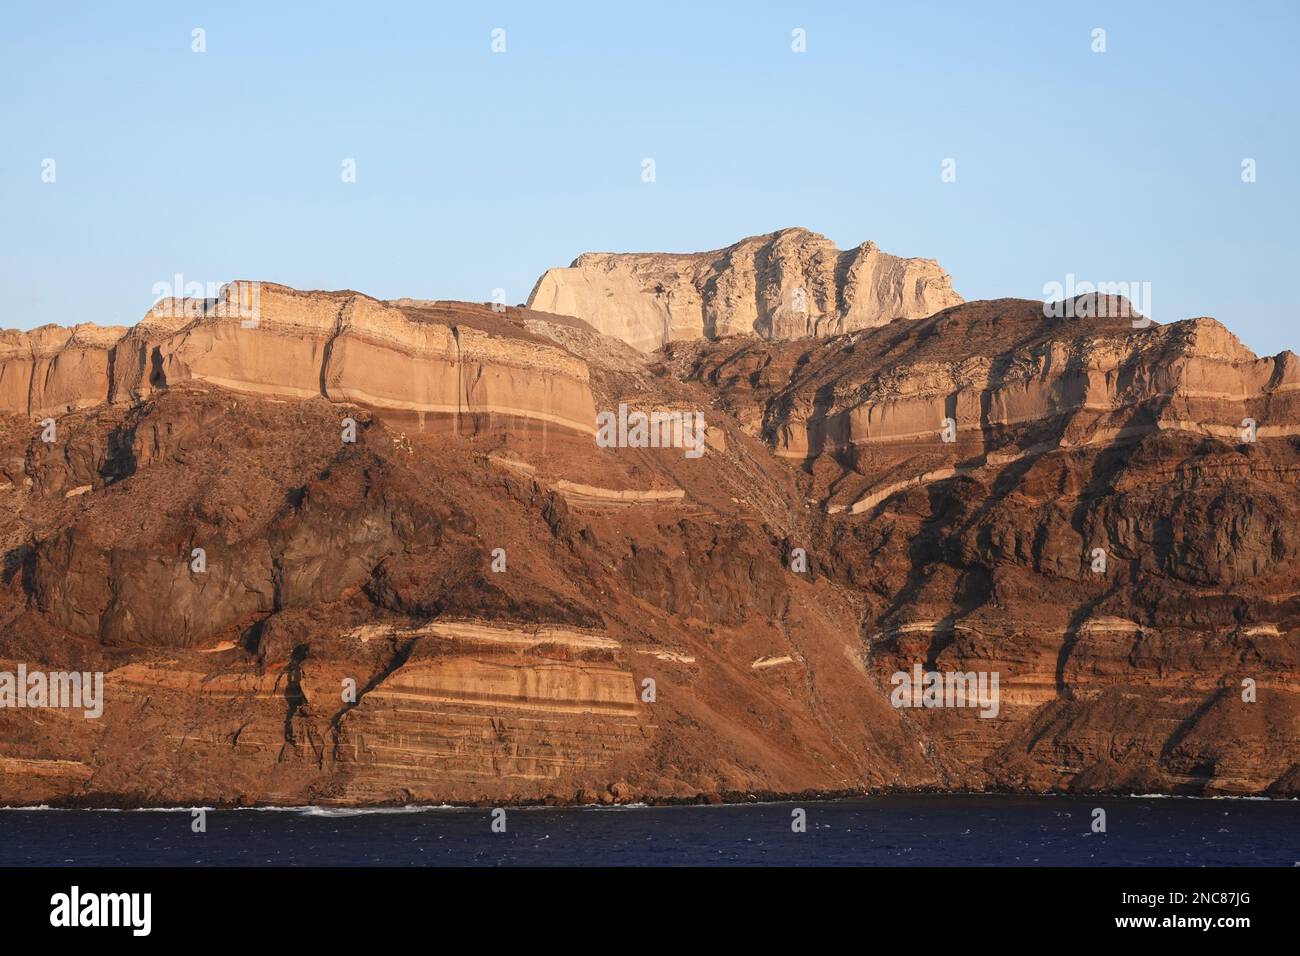 The cliffs revealing the geology of Santorini one of the Cyclades islands in the Aegean Sea, Greece Stock Photo